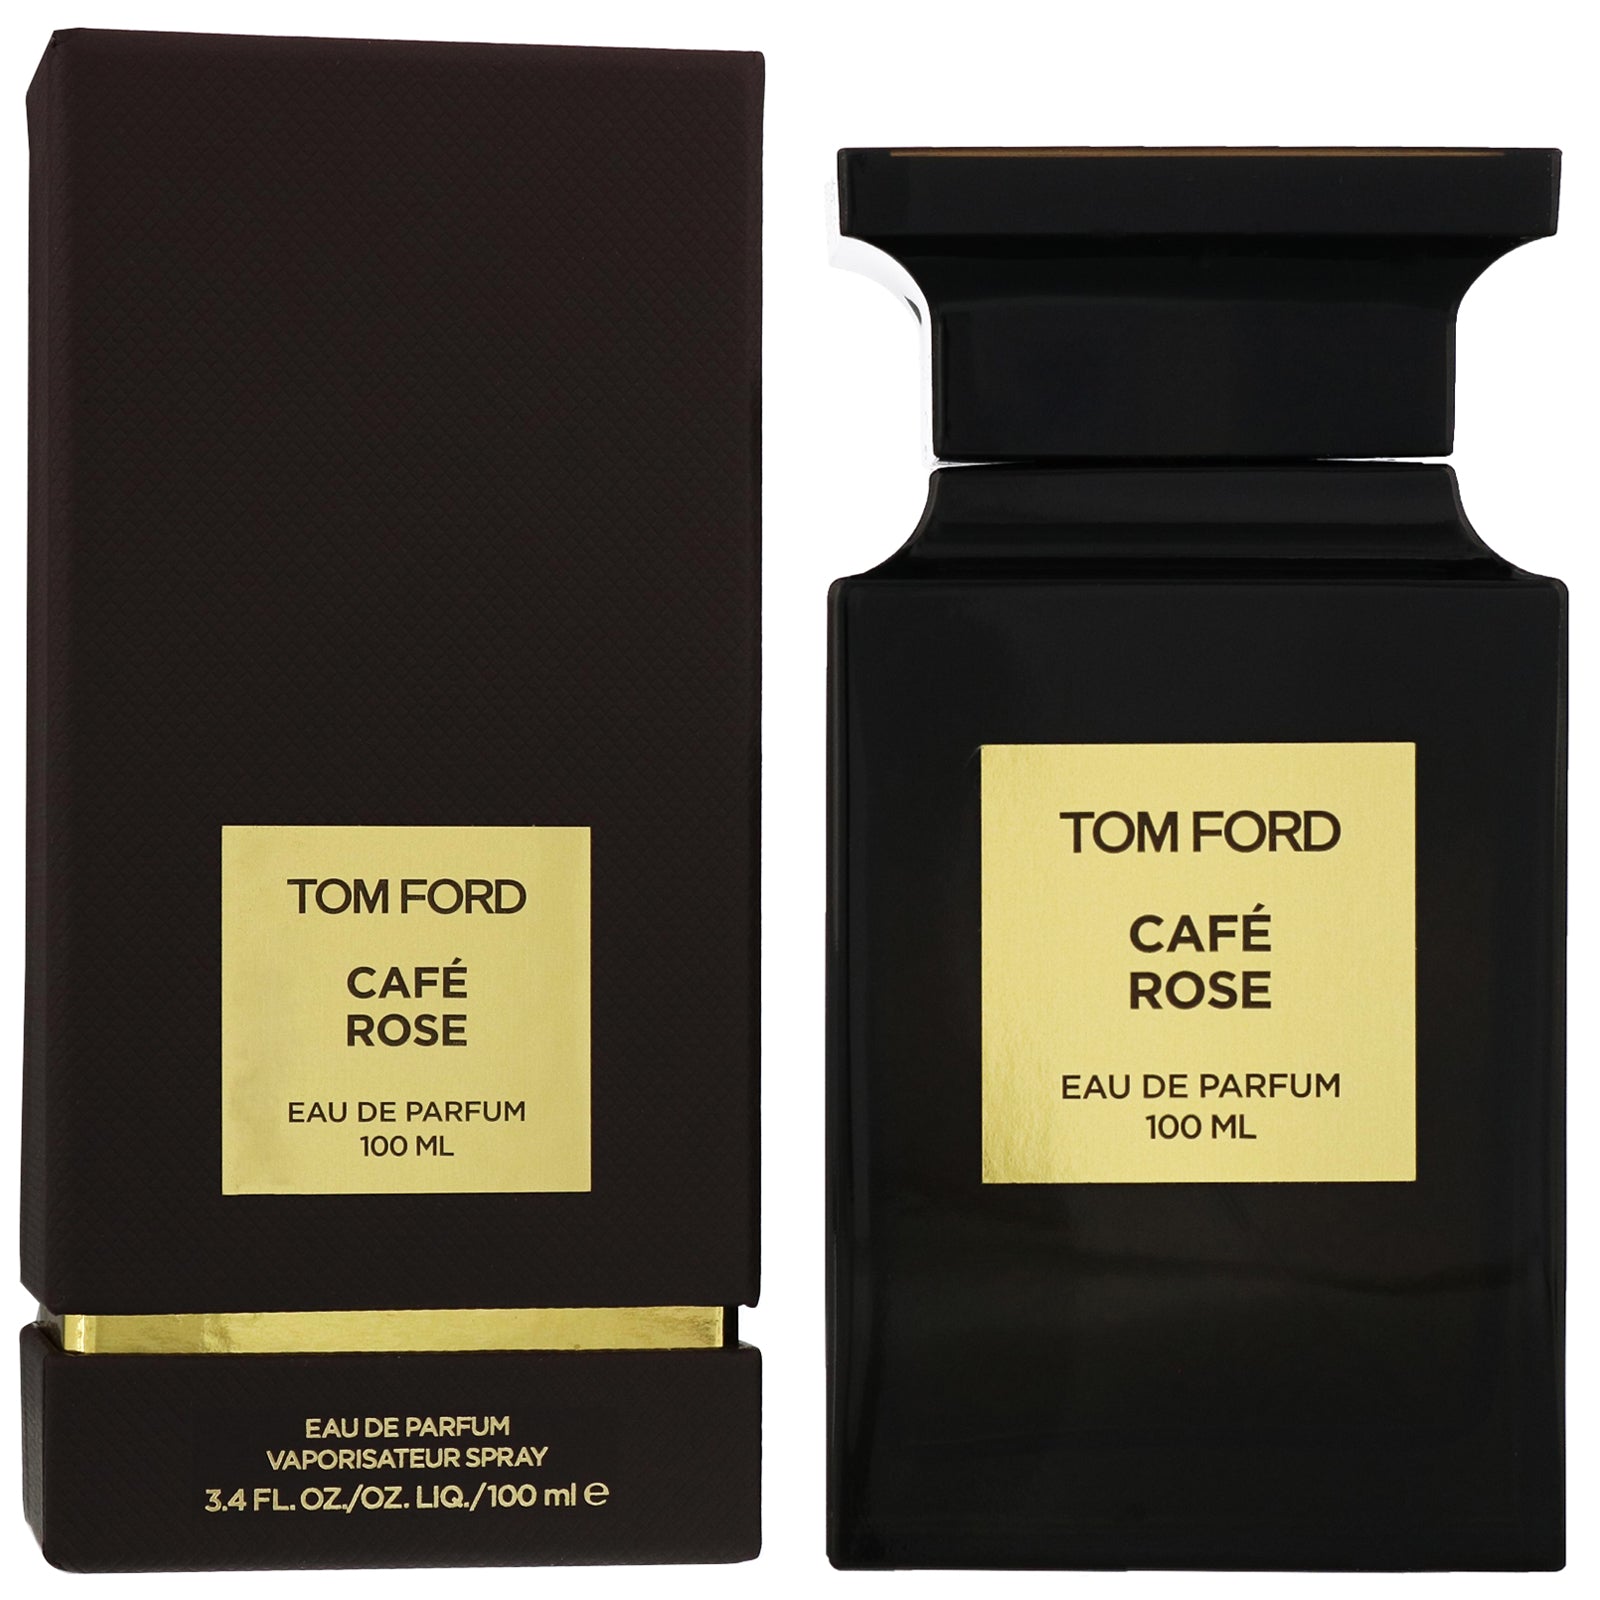 CAFE ROSE 100ML by TOM FORD The Fragrance Shop Inc